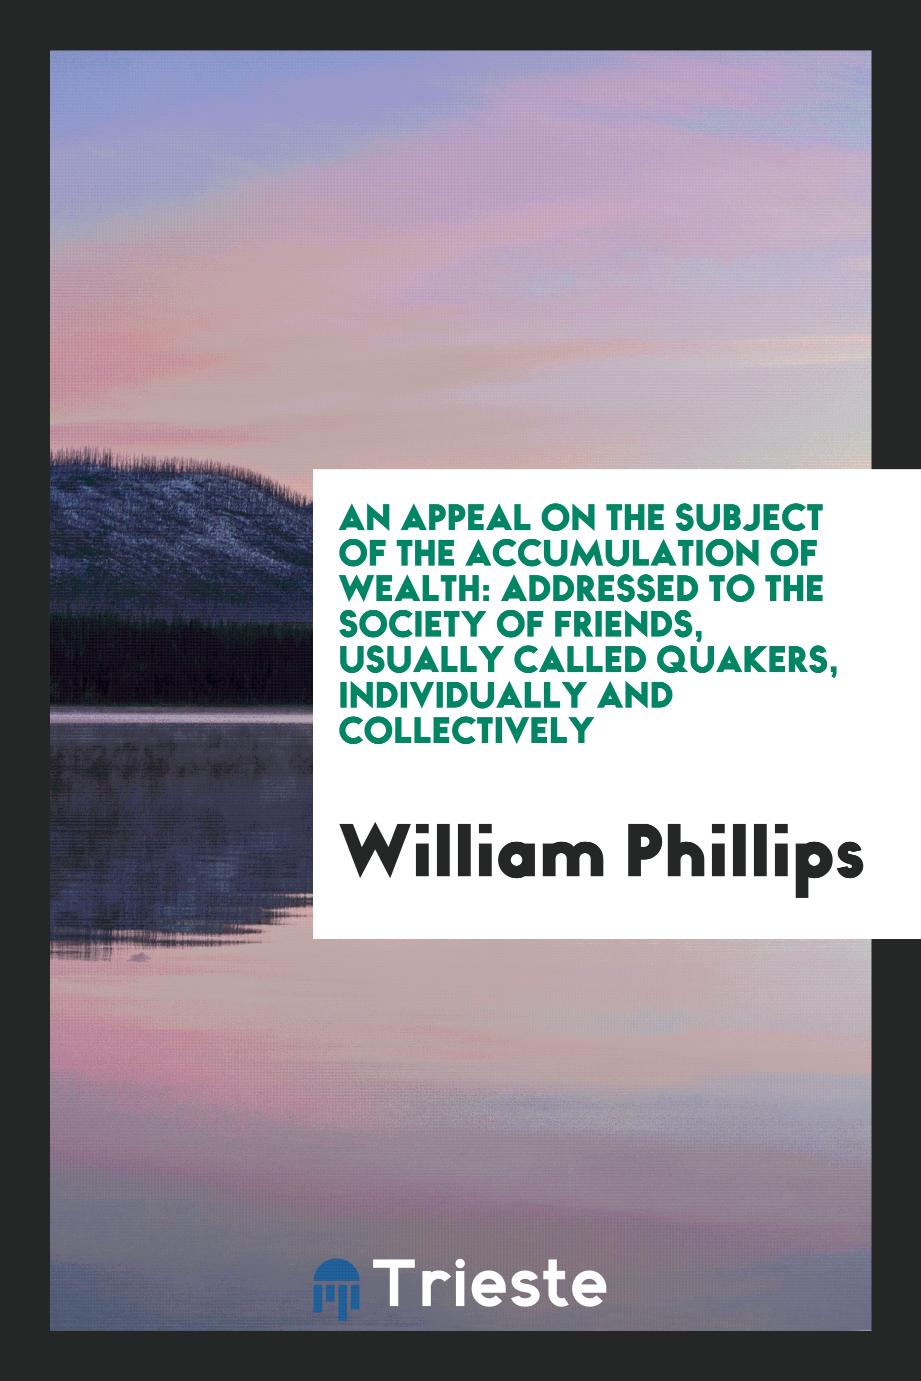 An Appeal on the Subject of the Accumulation of Wealth: Addressed to the Society of Friends, usually called Quakers, individually and collectively